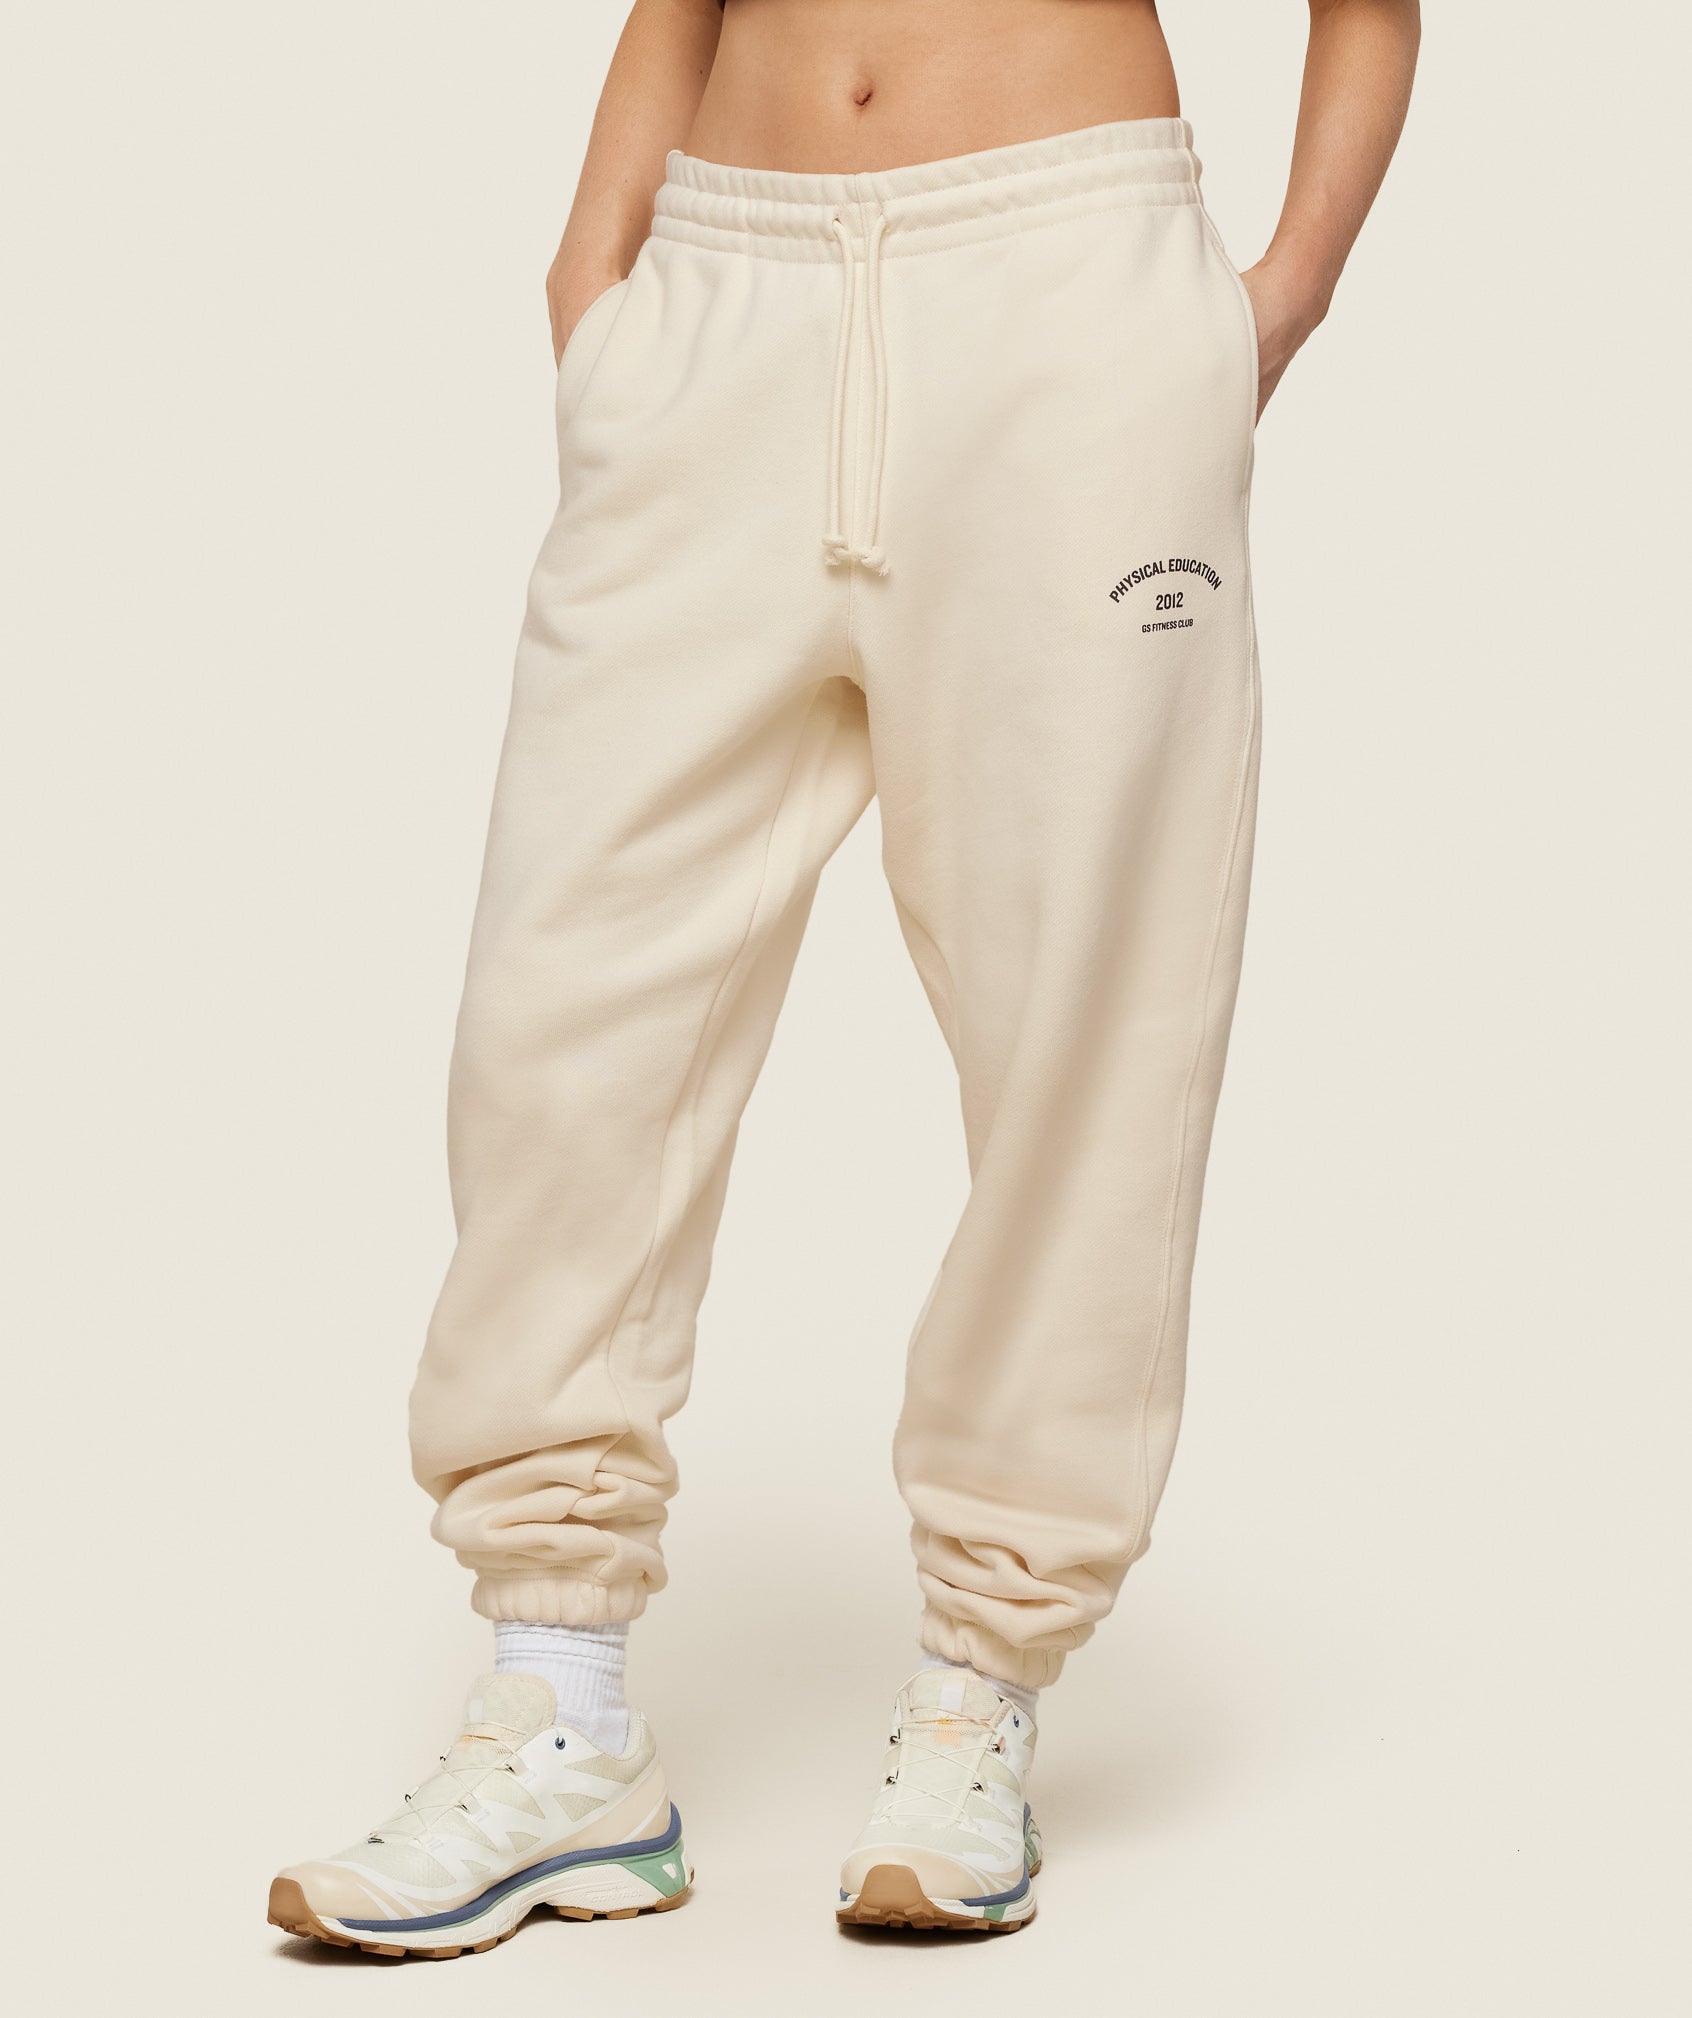 Phys Ed Graphic Sweatpants in Ecru White/Archive Brown - view 1